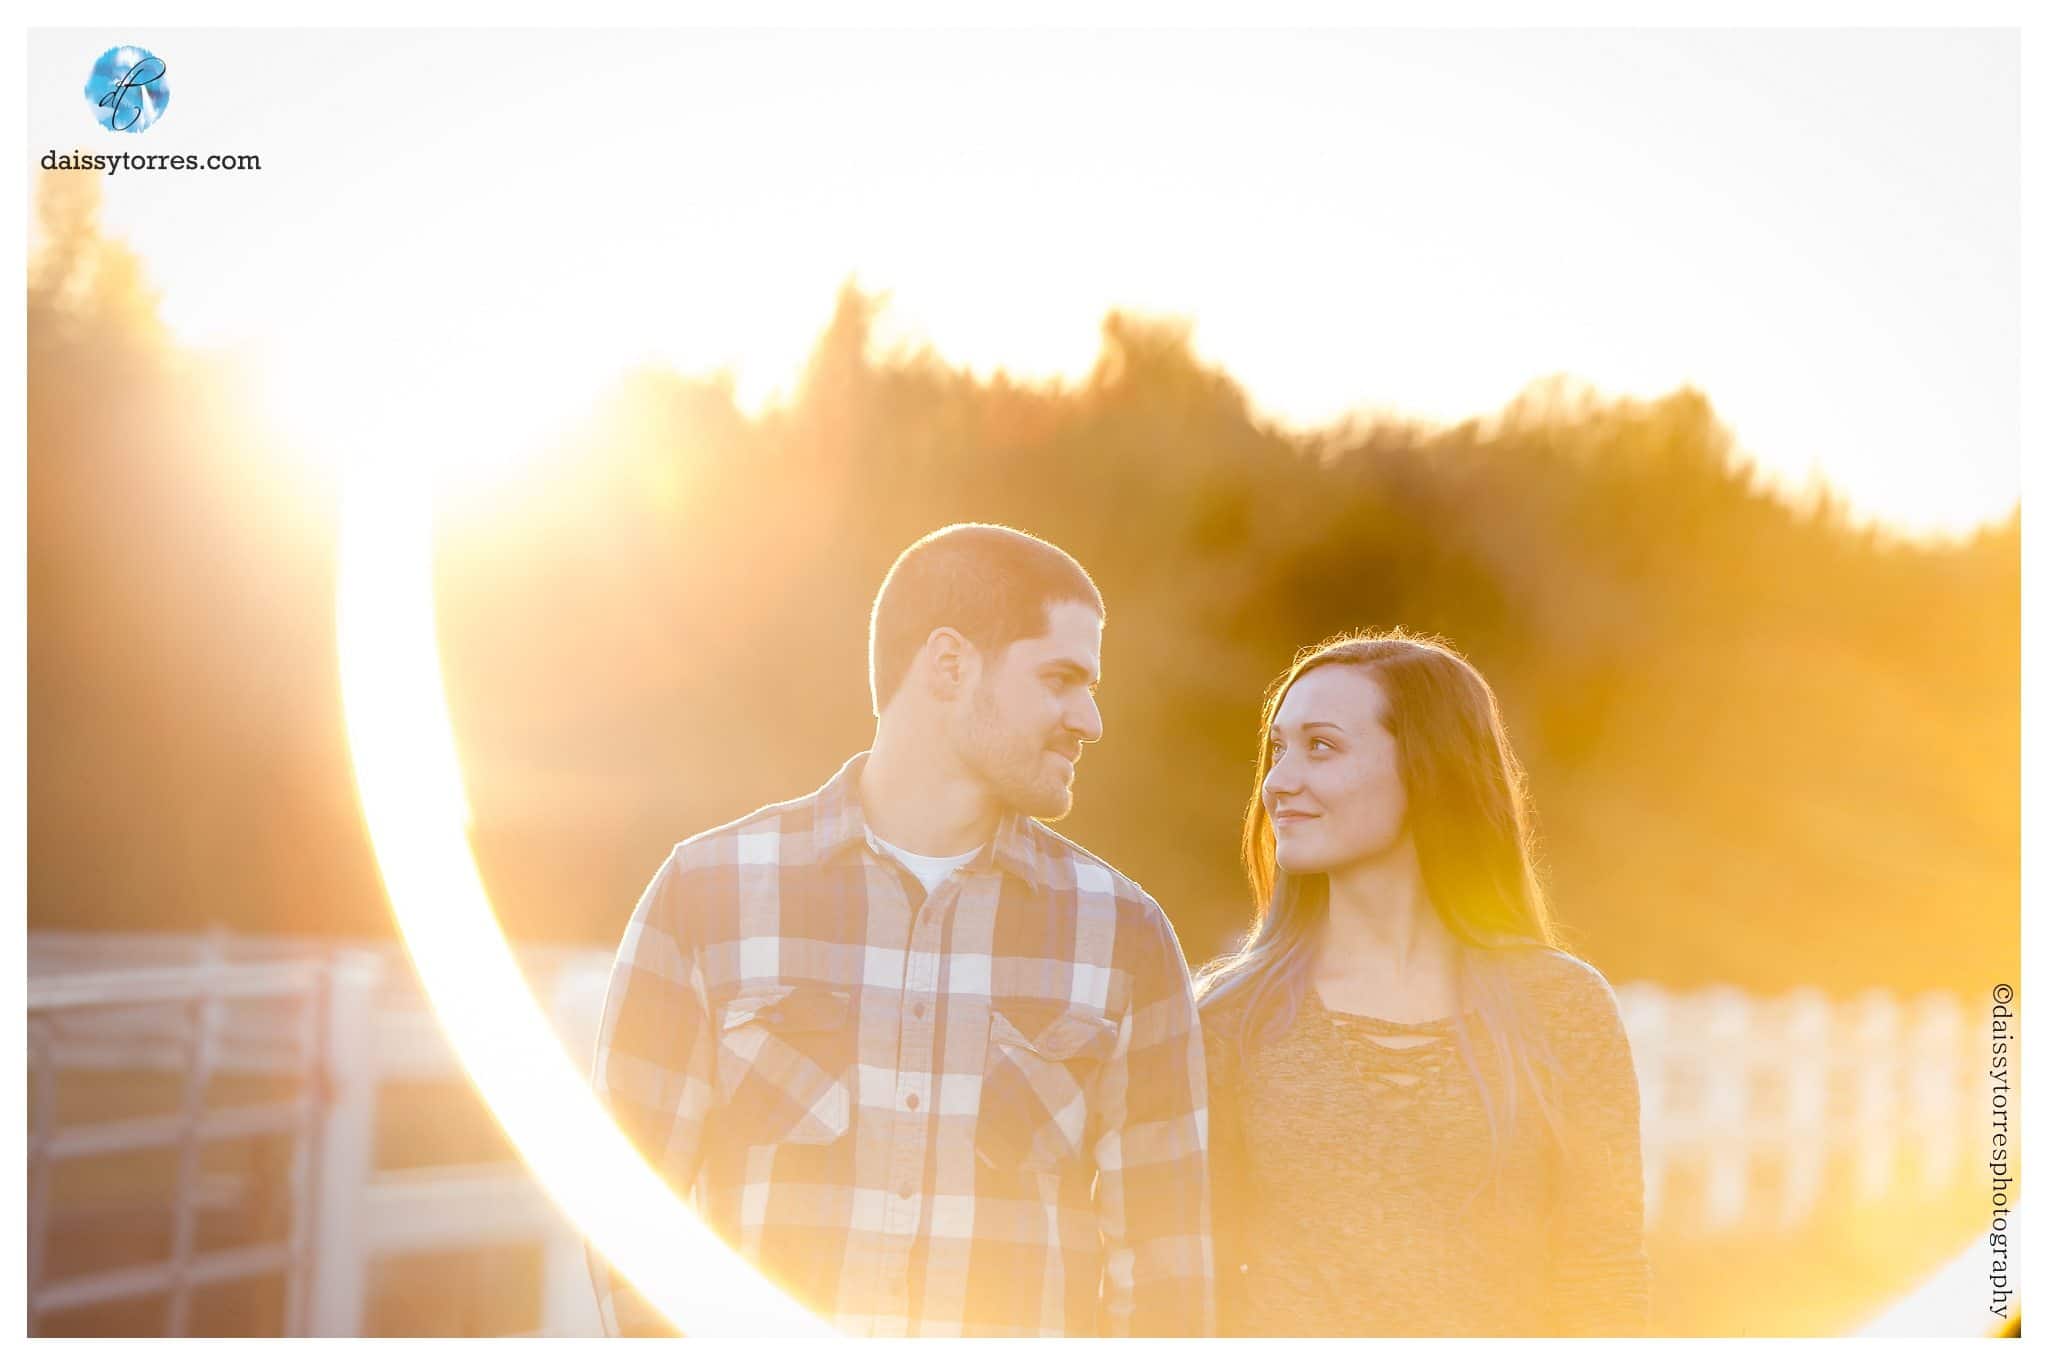 Back Bay Engagement Session - love this sun glare!